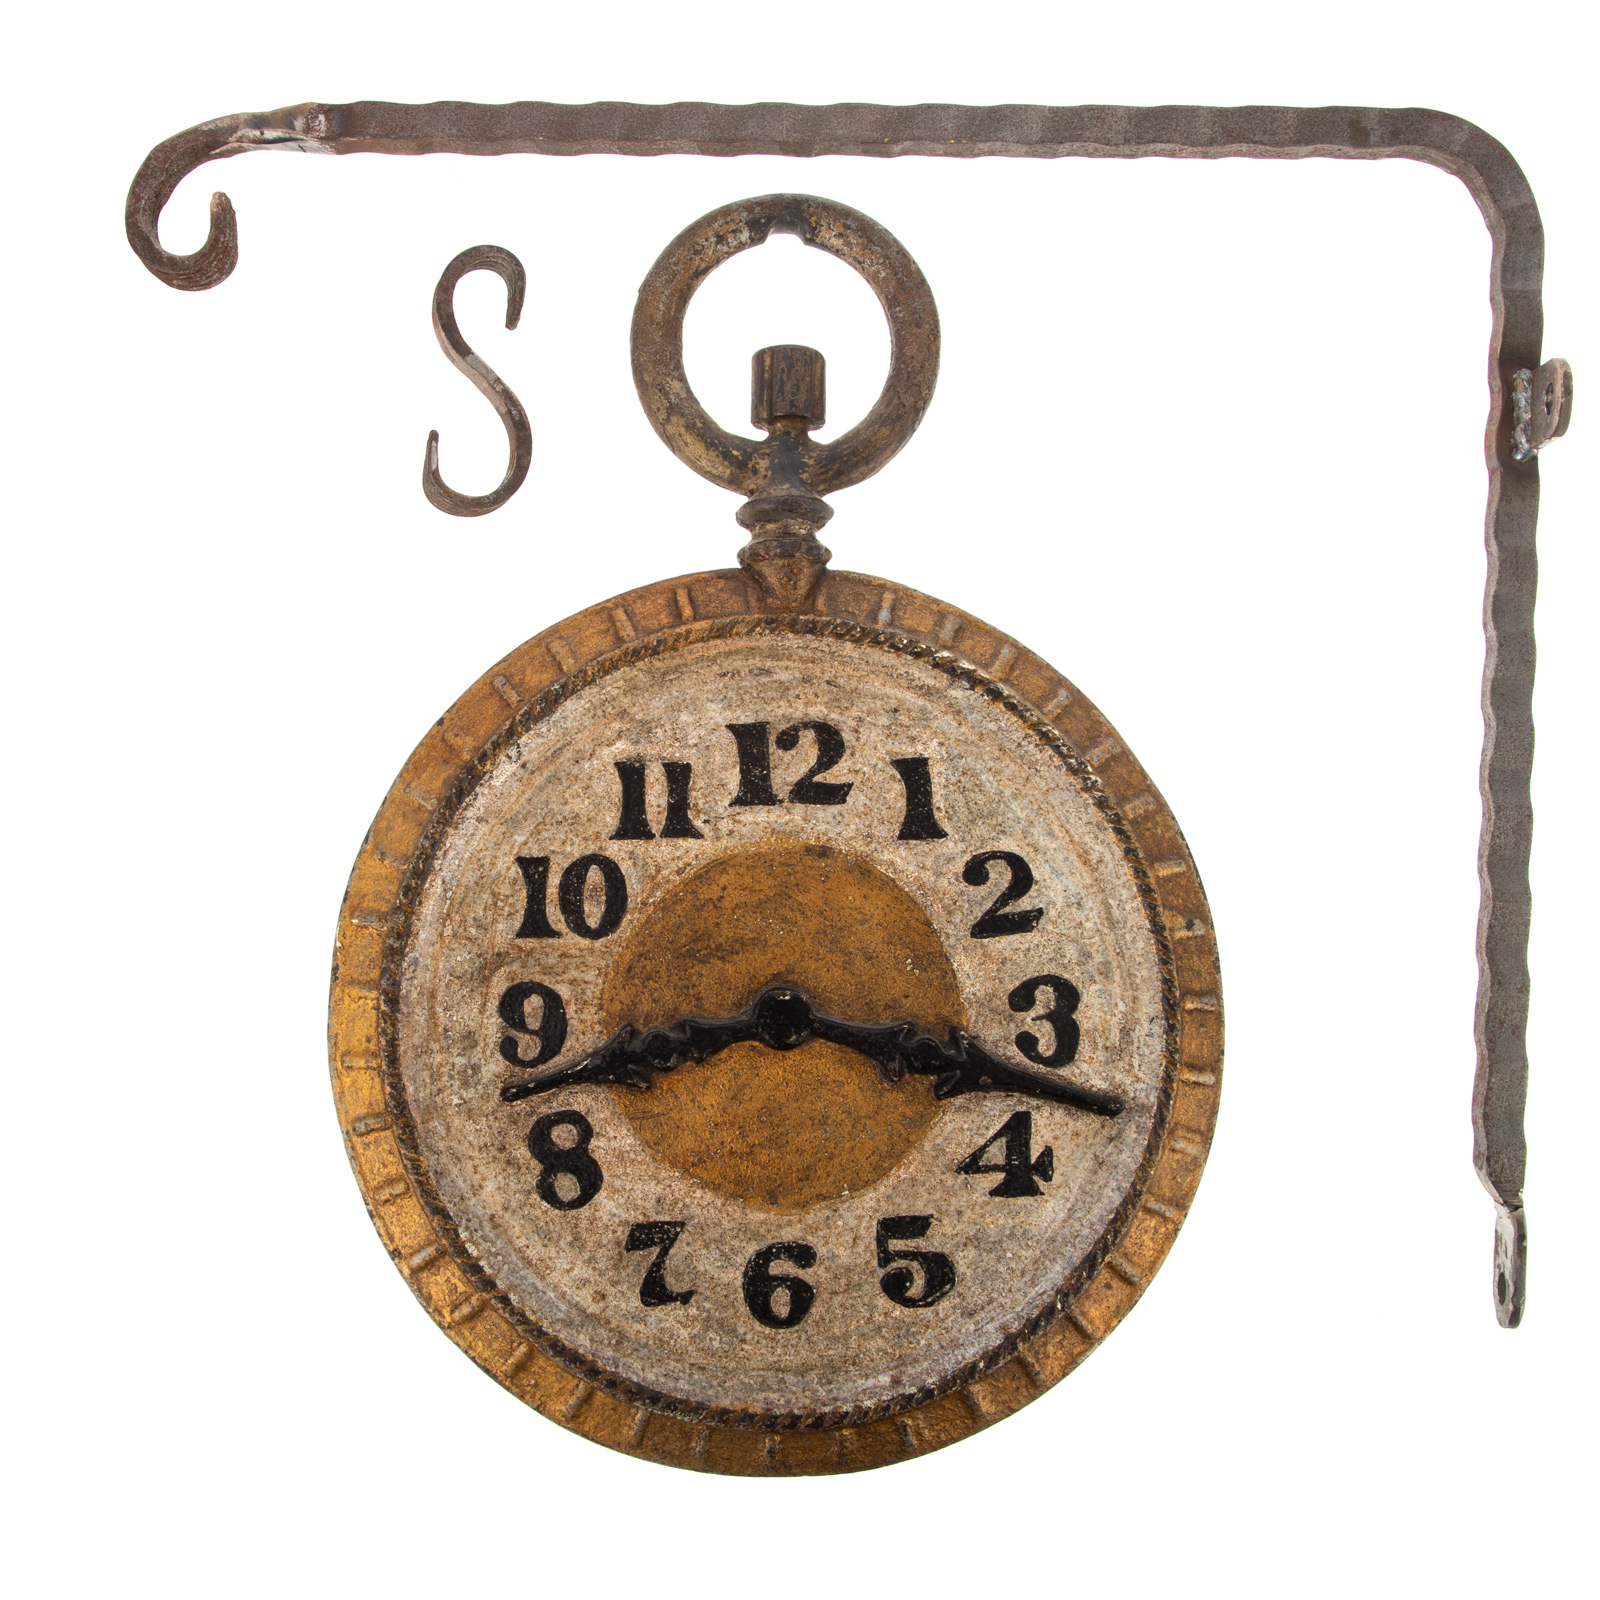 PAINTED CAST IRON POCKET WATCH